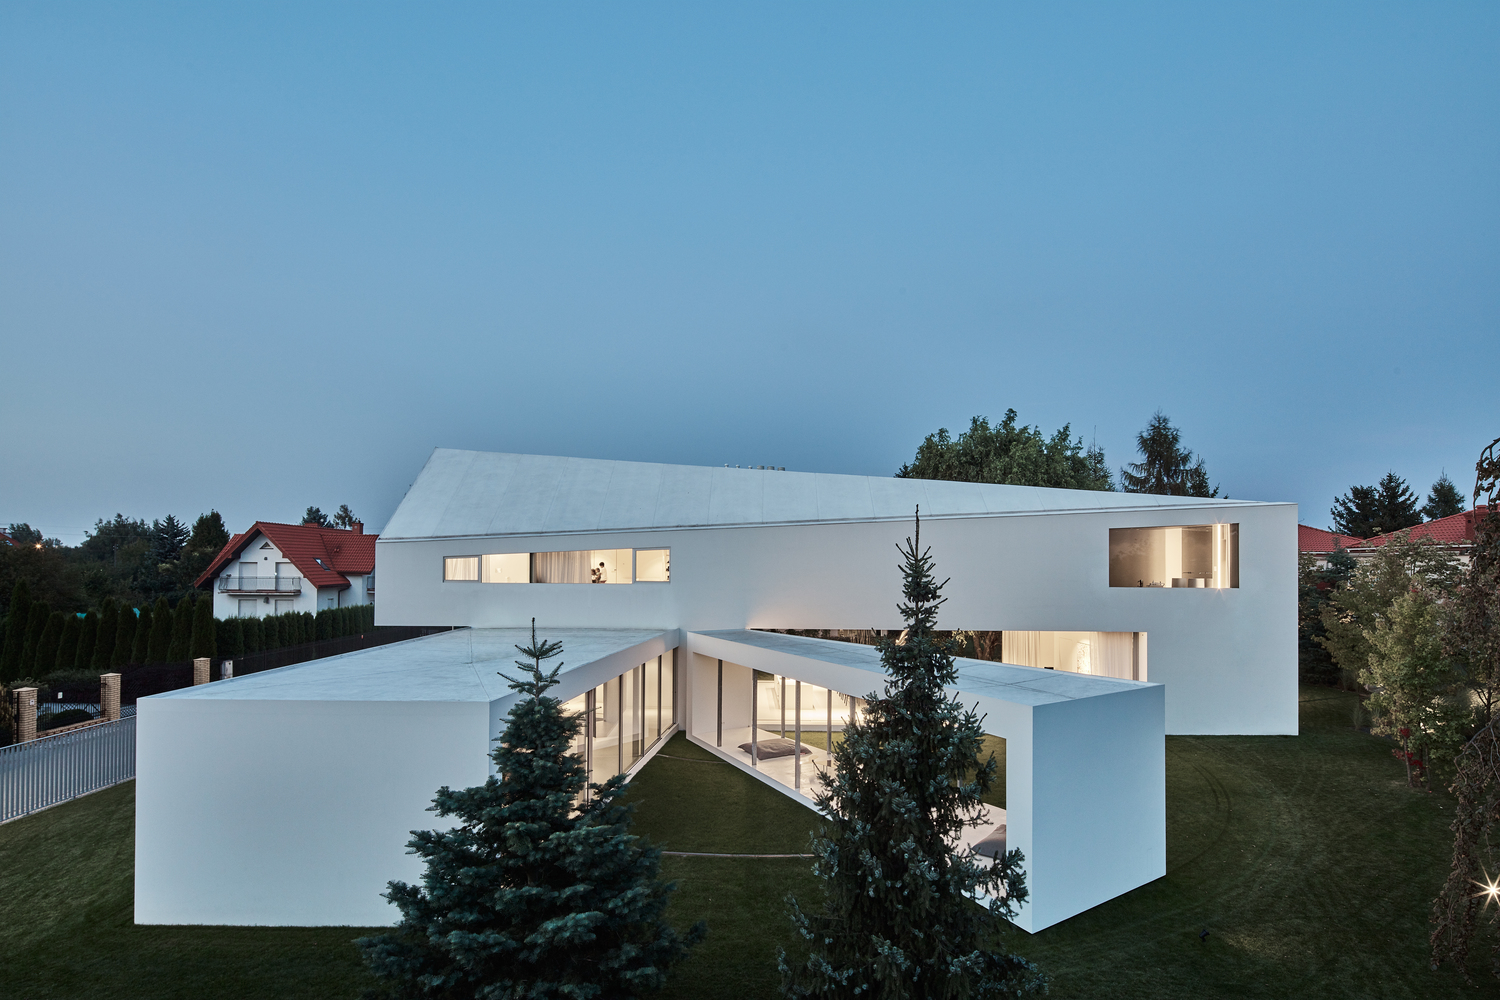 On the outside, the entire structure is white and has a very clean and minimalistic aesthetic